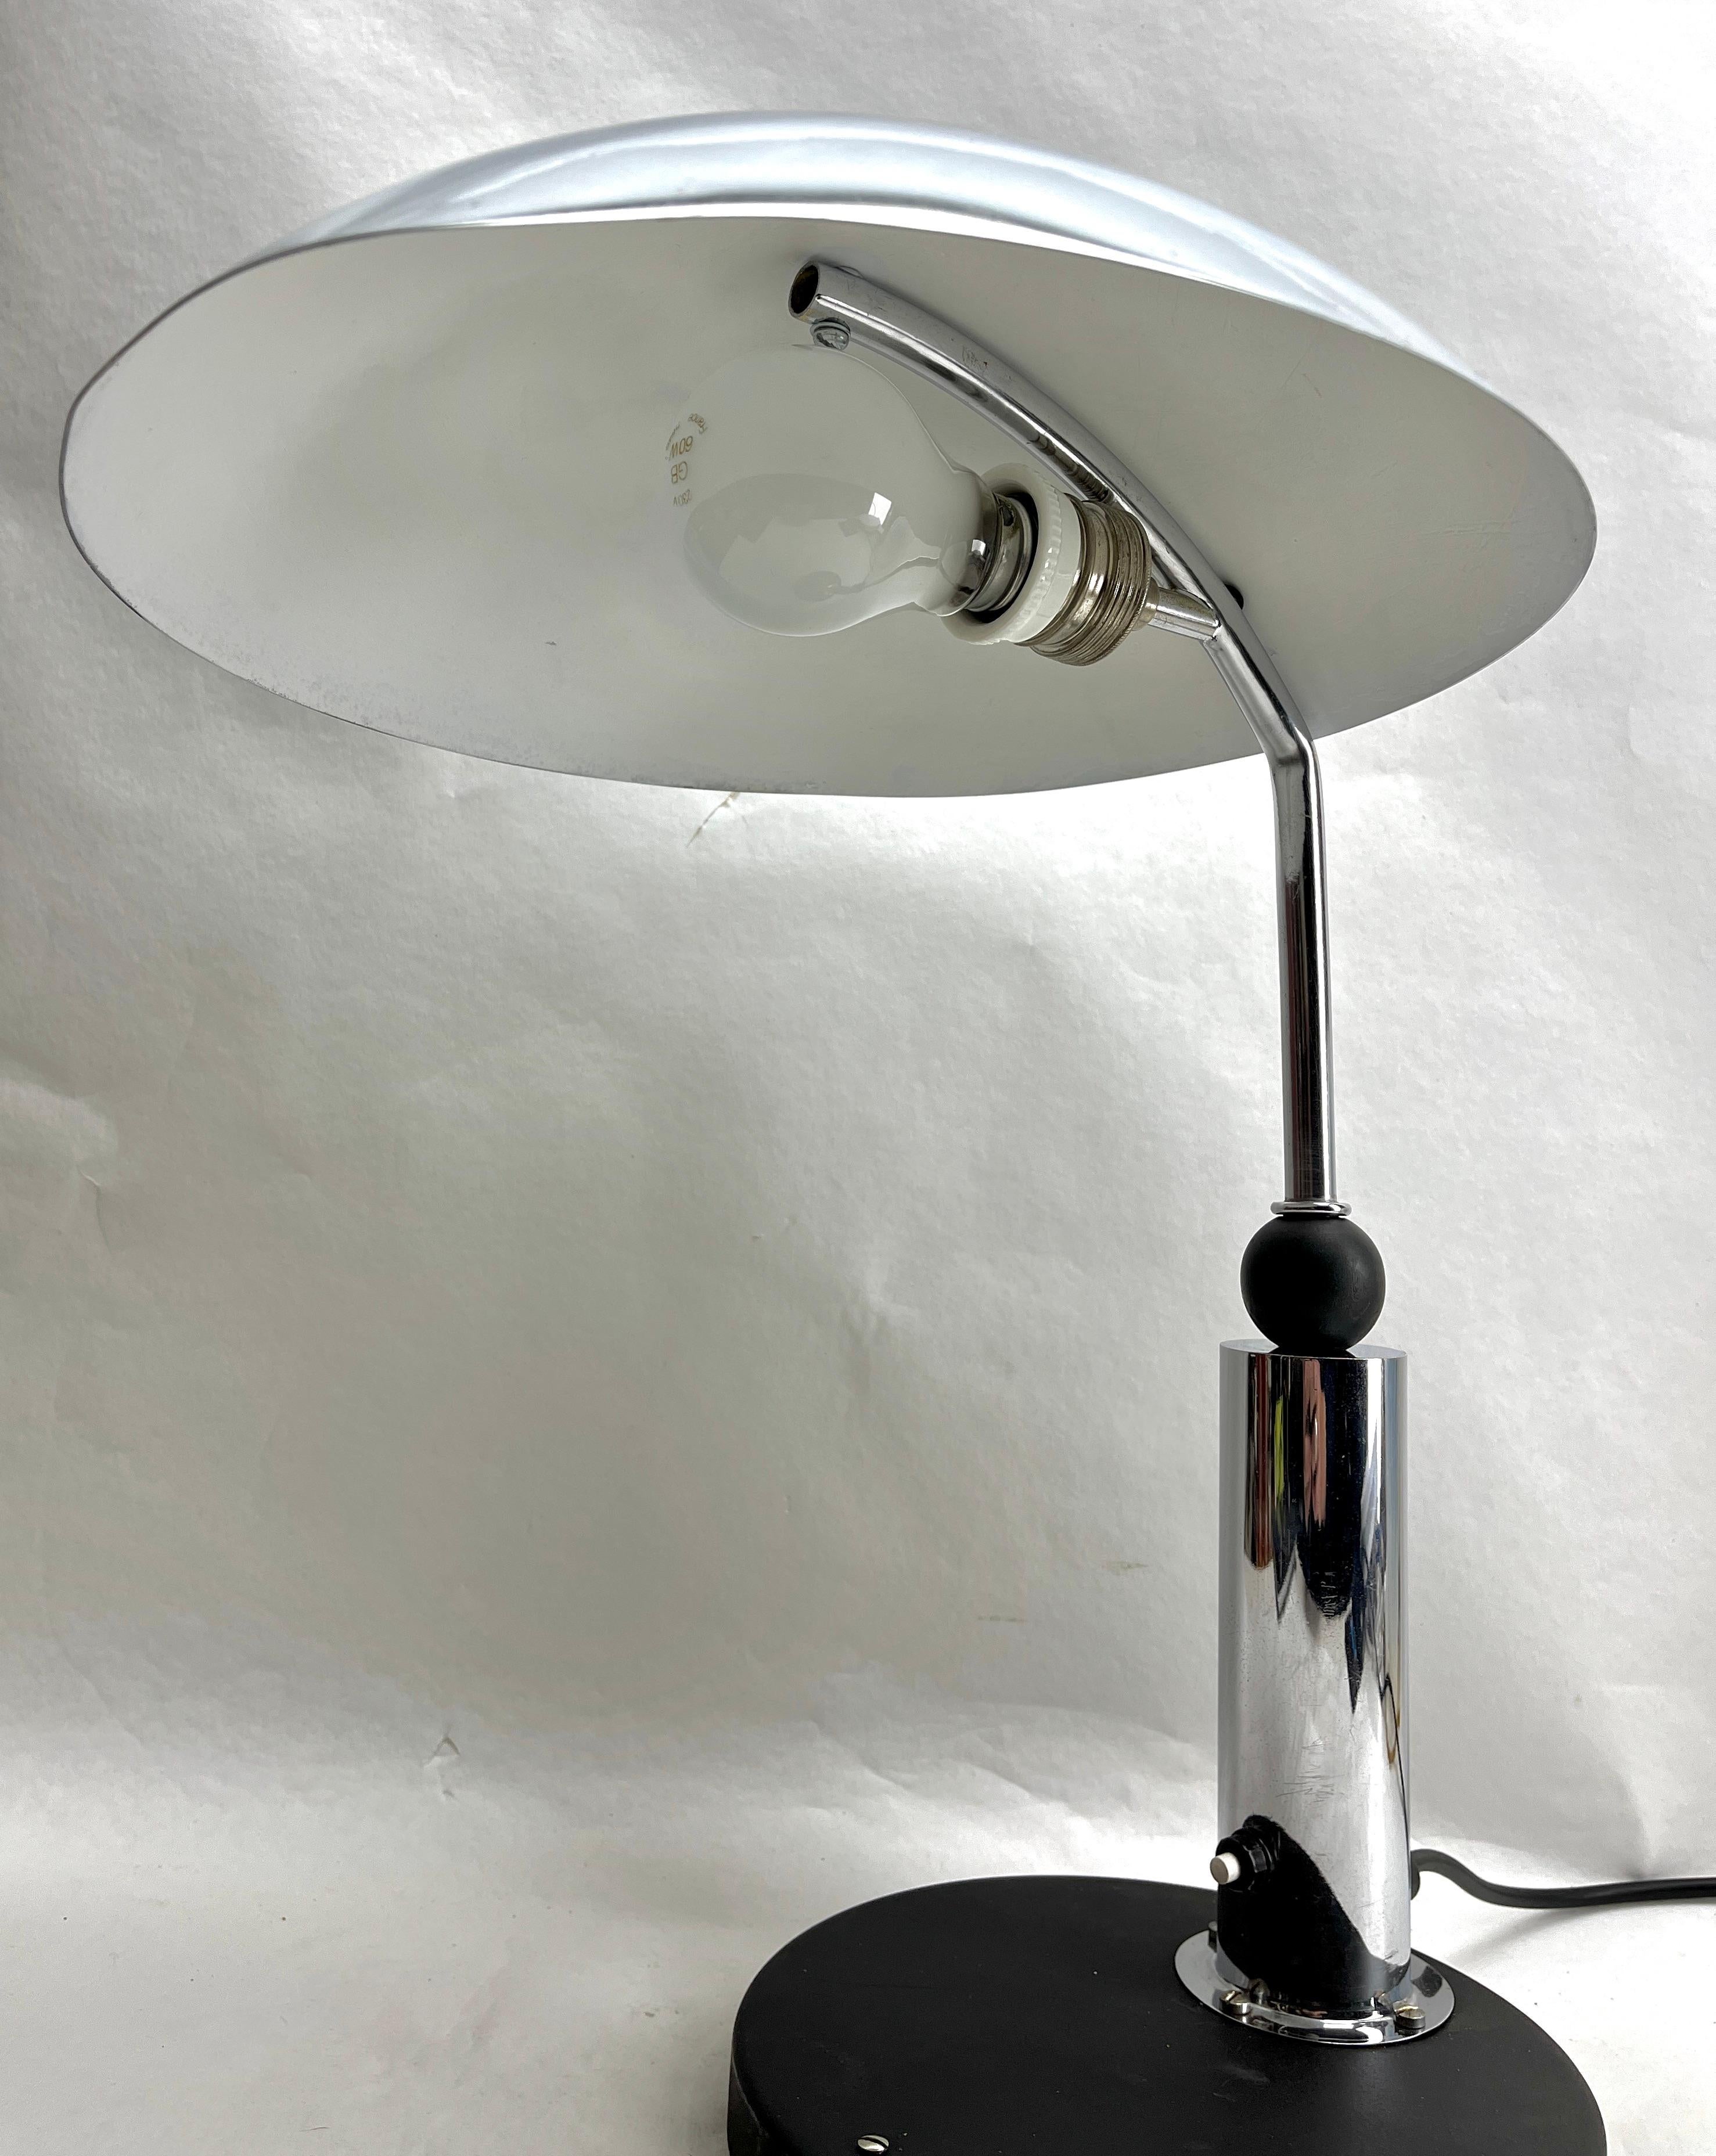 Desk or Side Table Lamp KMD (Daalderop) Tiel in Bauhaus style 1930s
This original, period Aerly Century Desk lamp was designed by KMD, 
Desk or Side Table Lamp Tiel Netherlands
Bauhaus style, with a chrome hood and stand and a black enamelled base